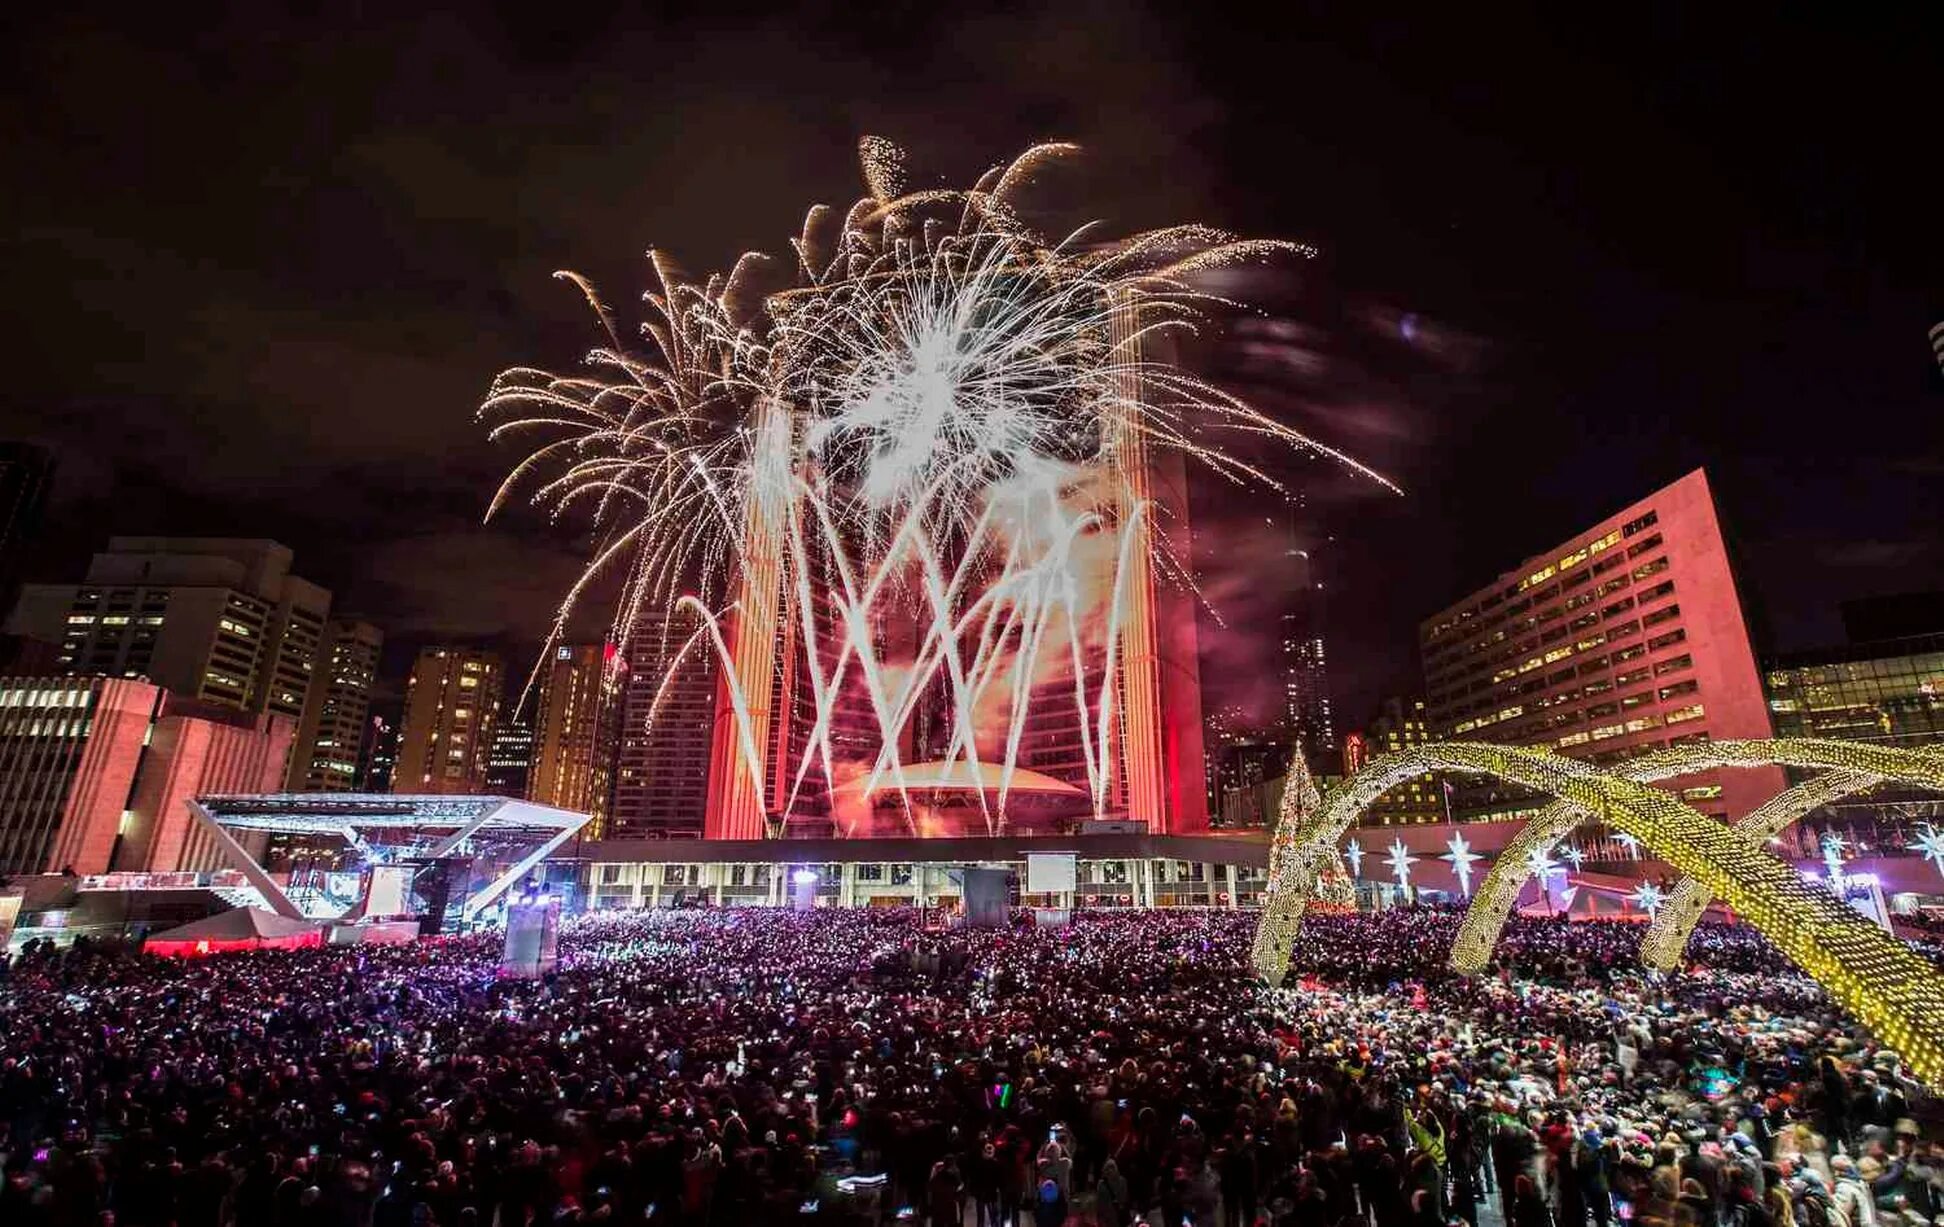 Площадь Nathan Phillips Square. Nathan Phillips Square в Торонто. Nathan Phillips Square новый год. Новый год в Канаде. New year events